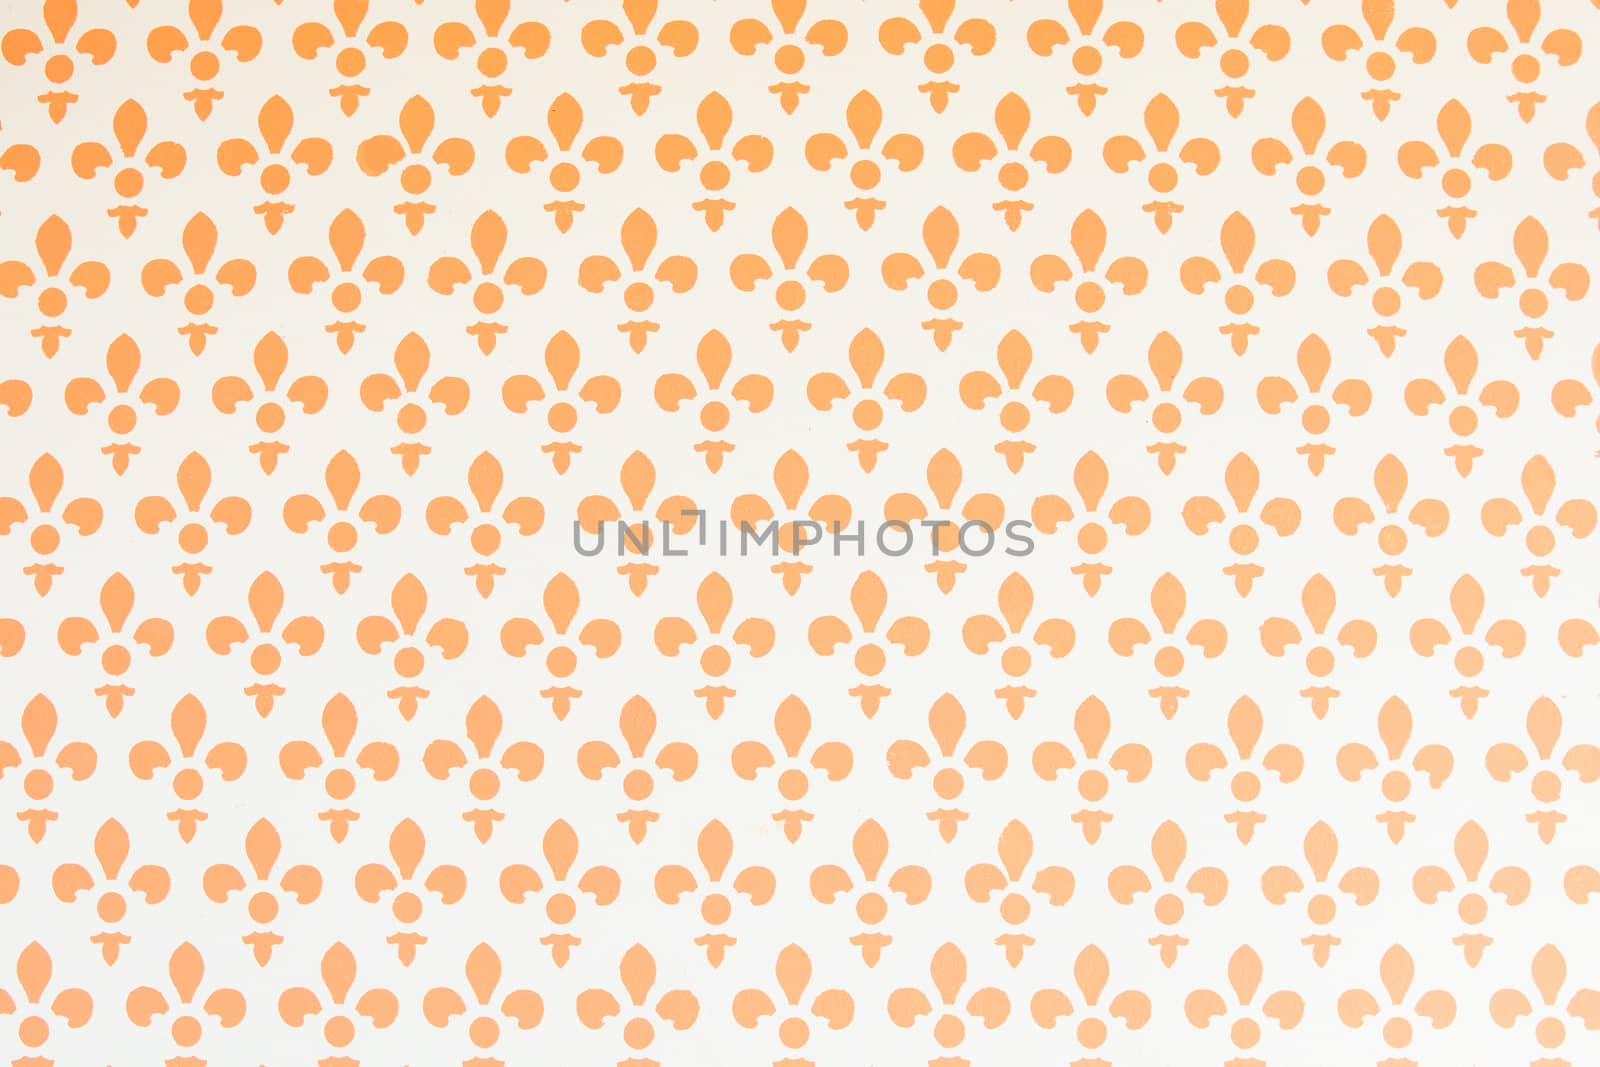 the beautiful oragne pattern on the white background ideal for wallpaper purpose